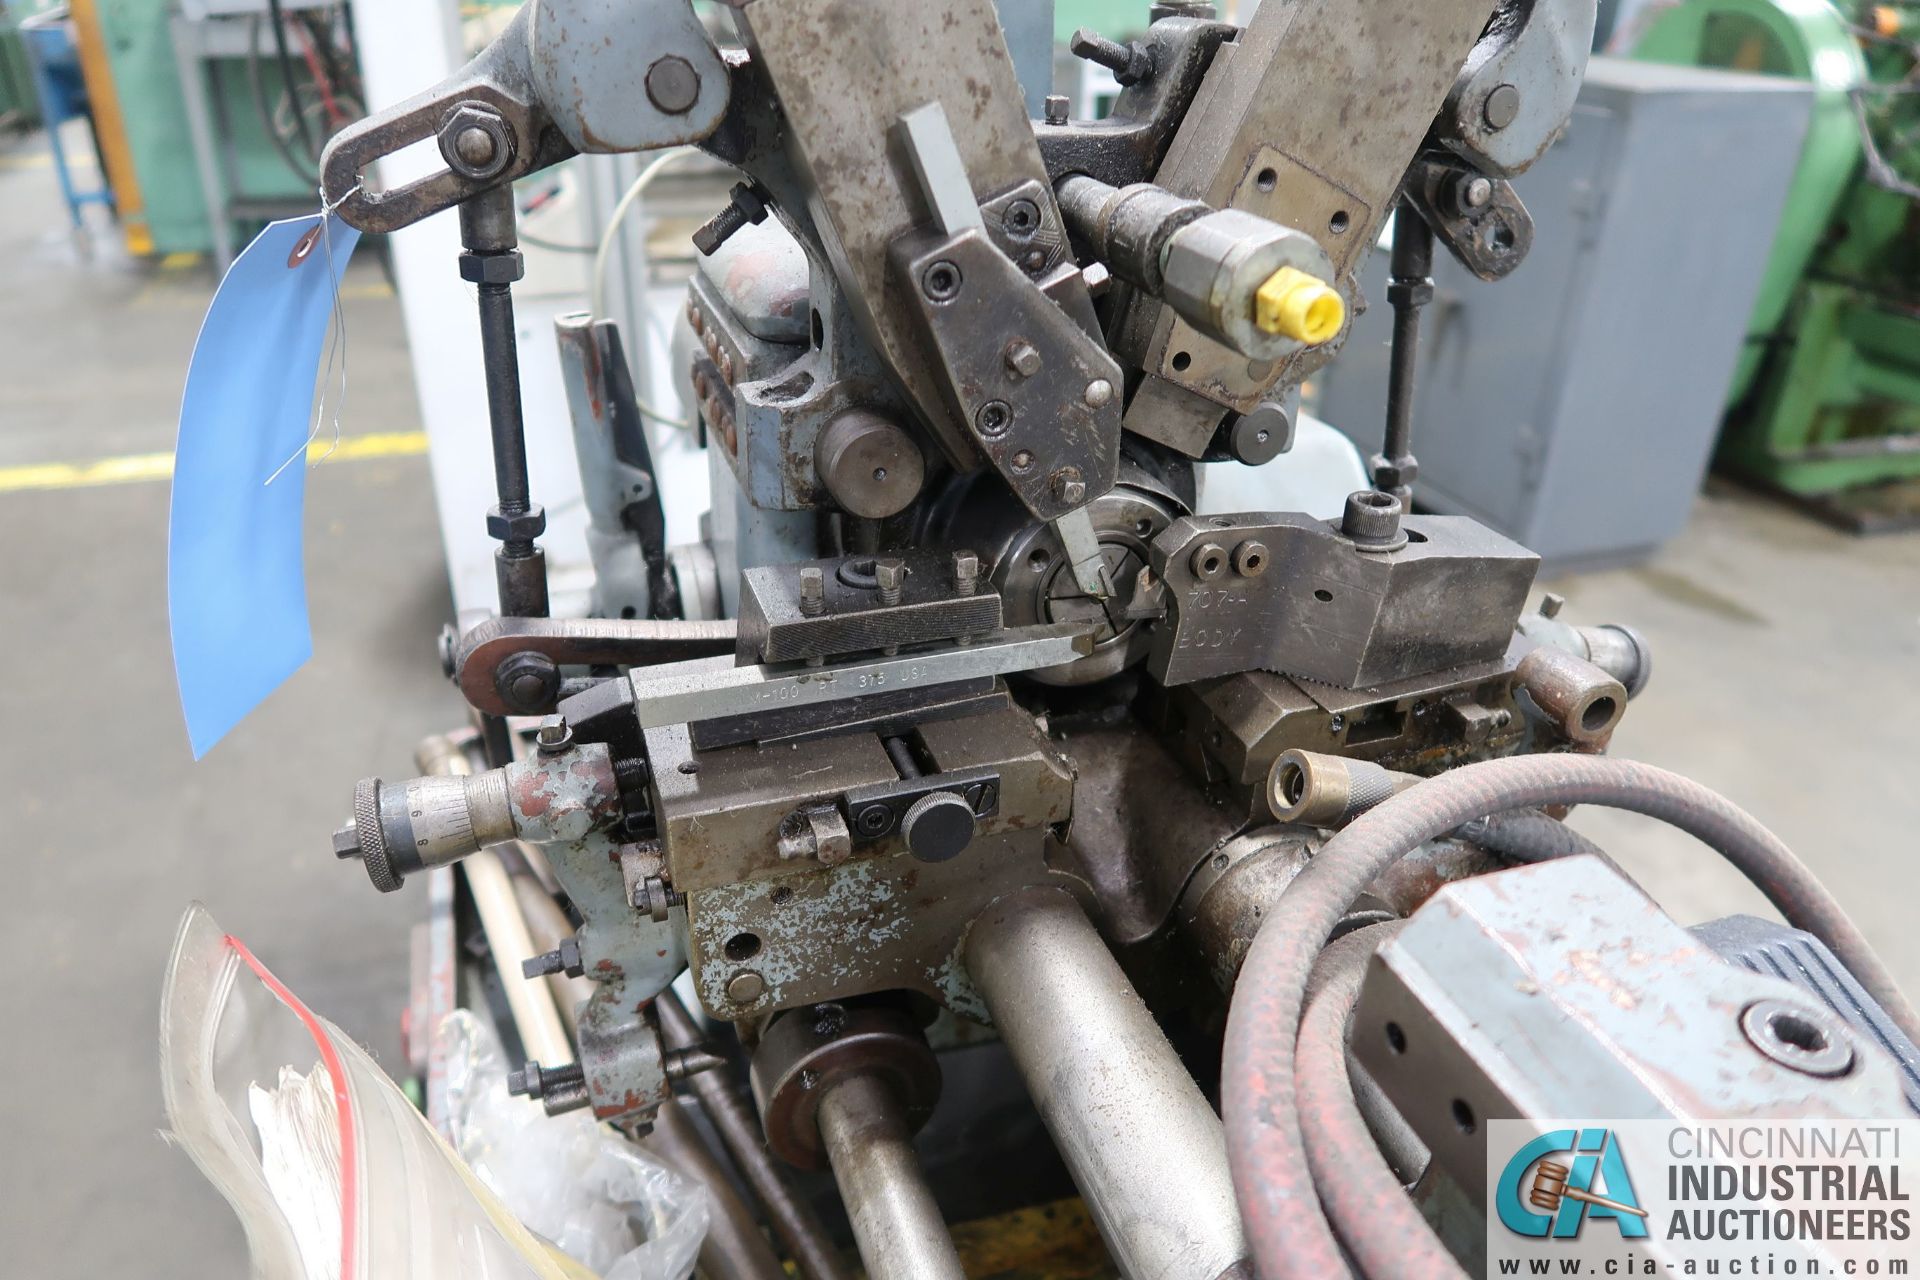 TRAUB MODEL A25 LATHE, SPINDLE SPEED 550 - 3400 RPM - Loading fee due the “ERRA” Pedowitz Machinery - Image 4 of 5